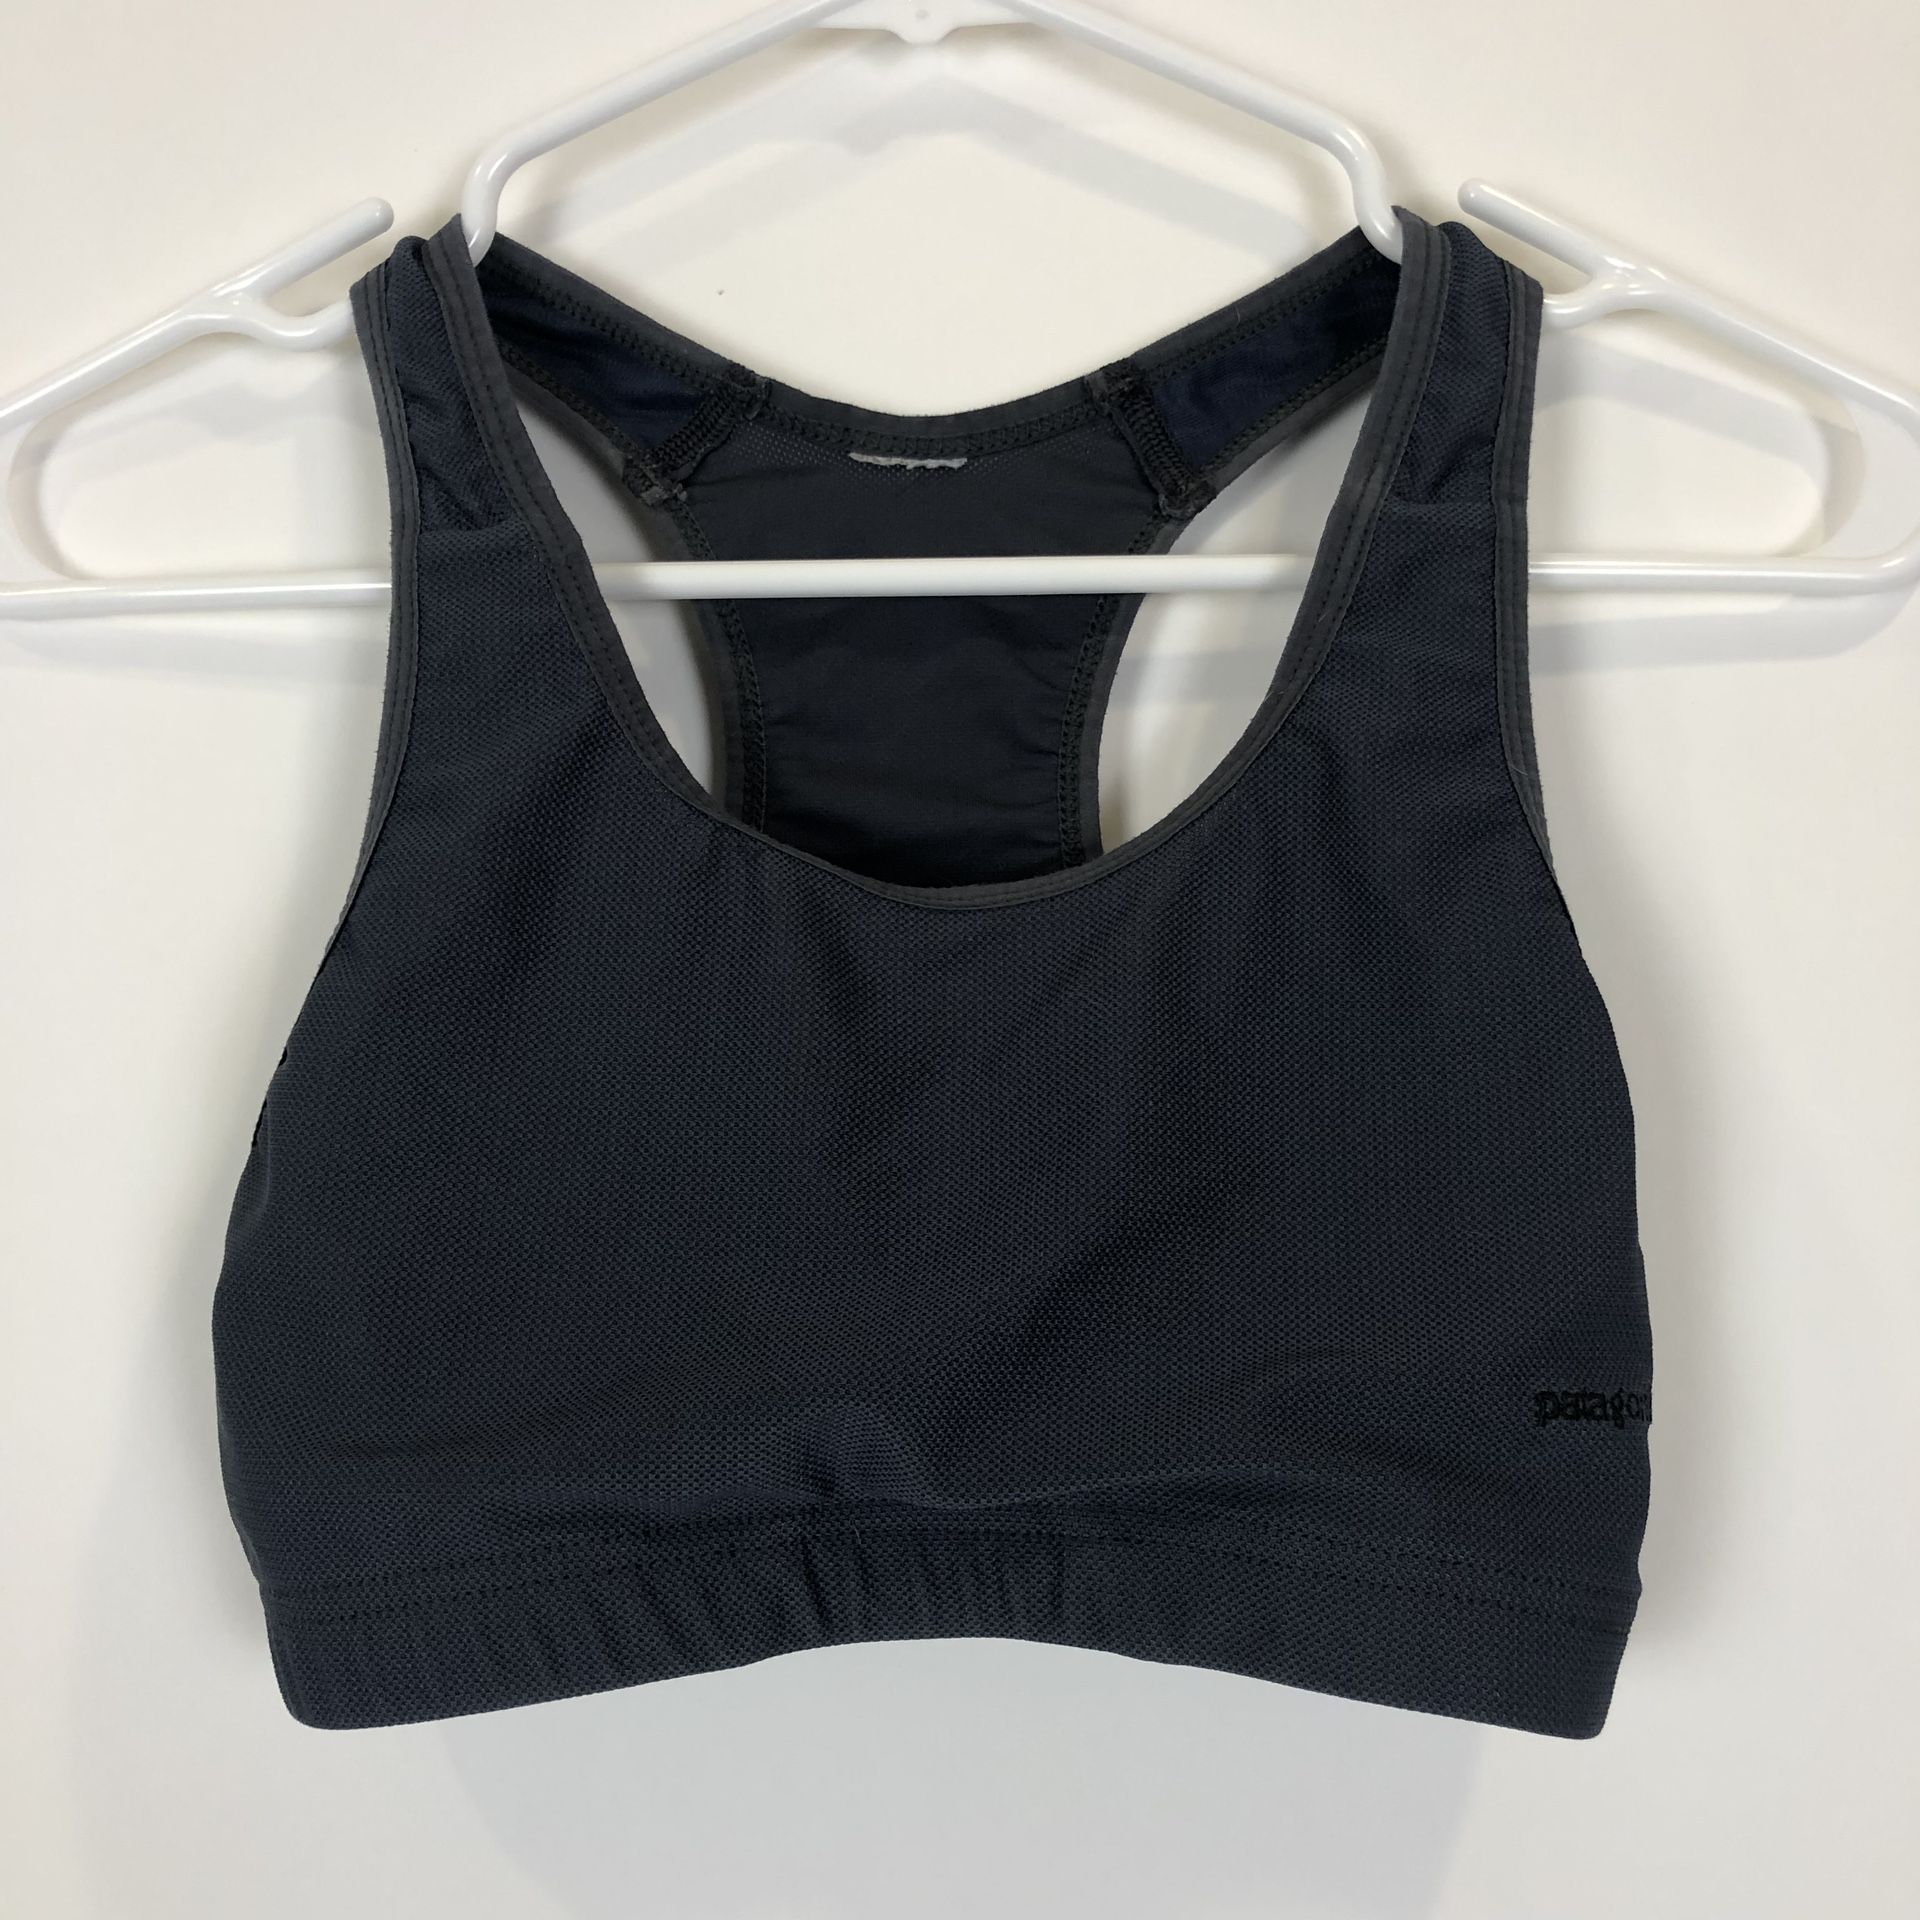 Patagonia Womens Sports Bra Exercise Top Size S